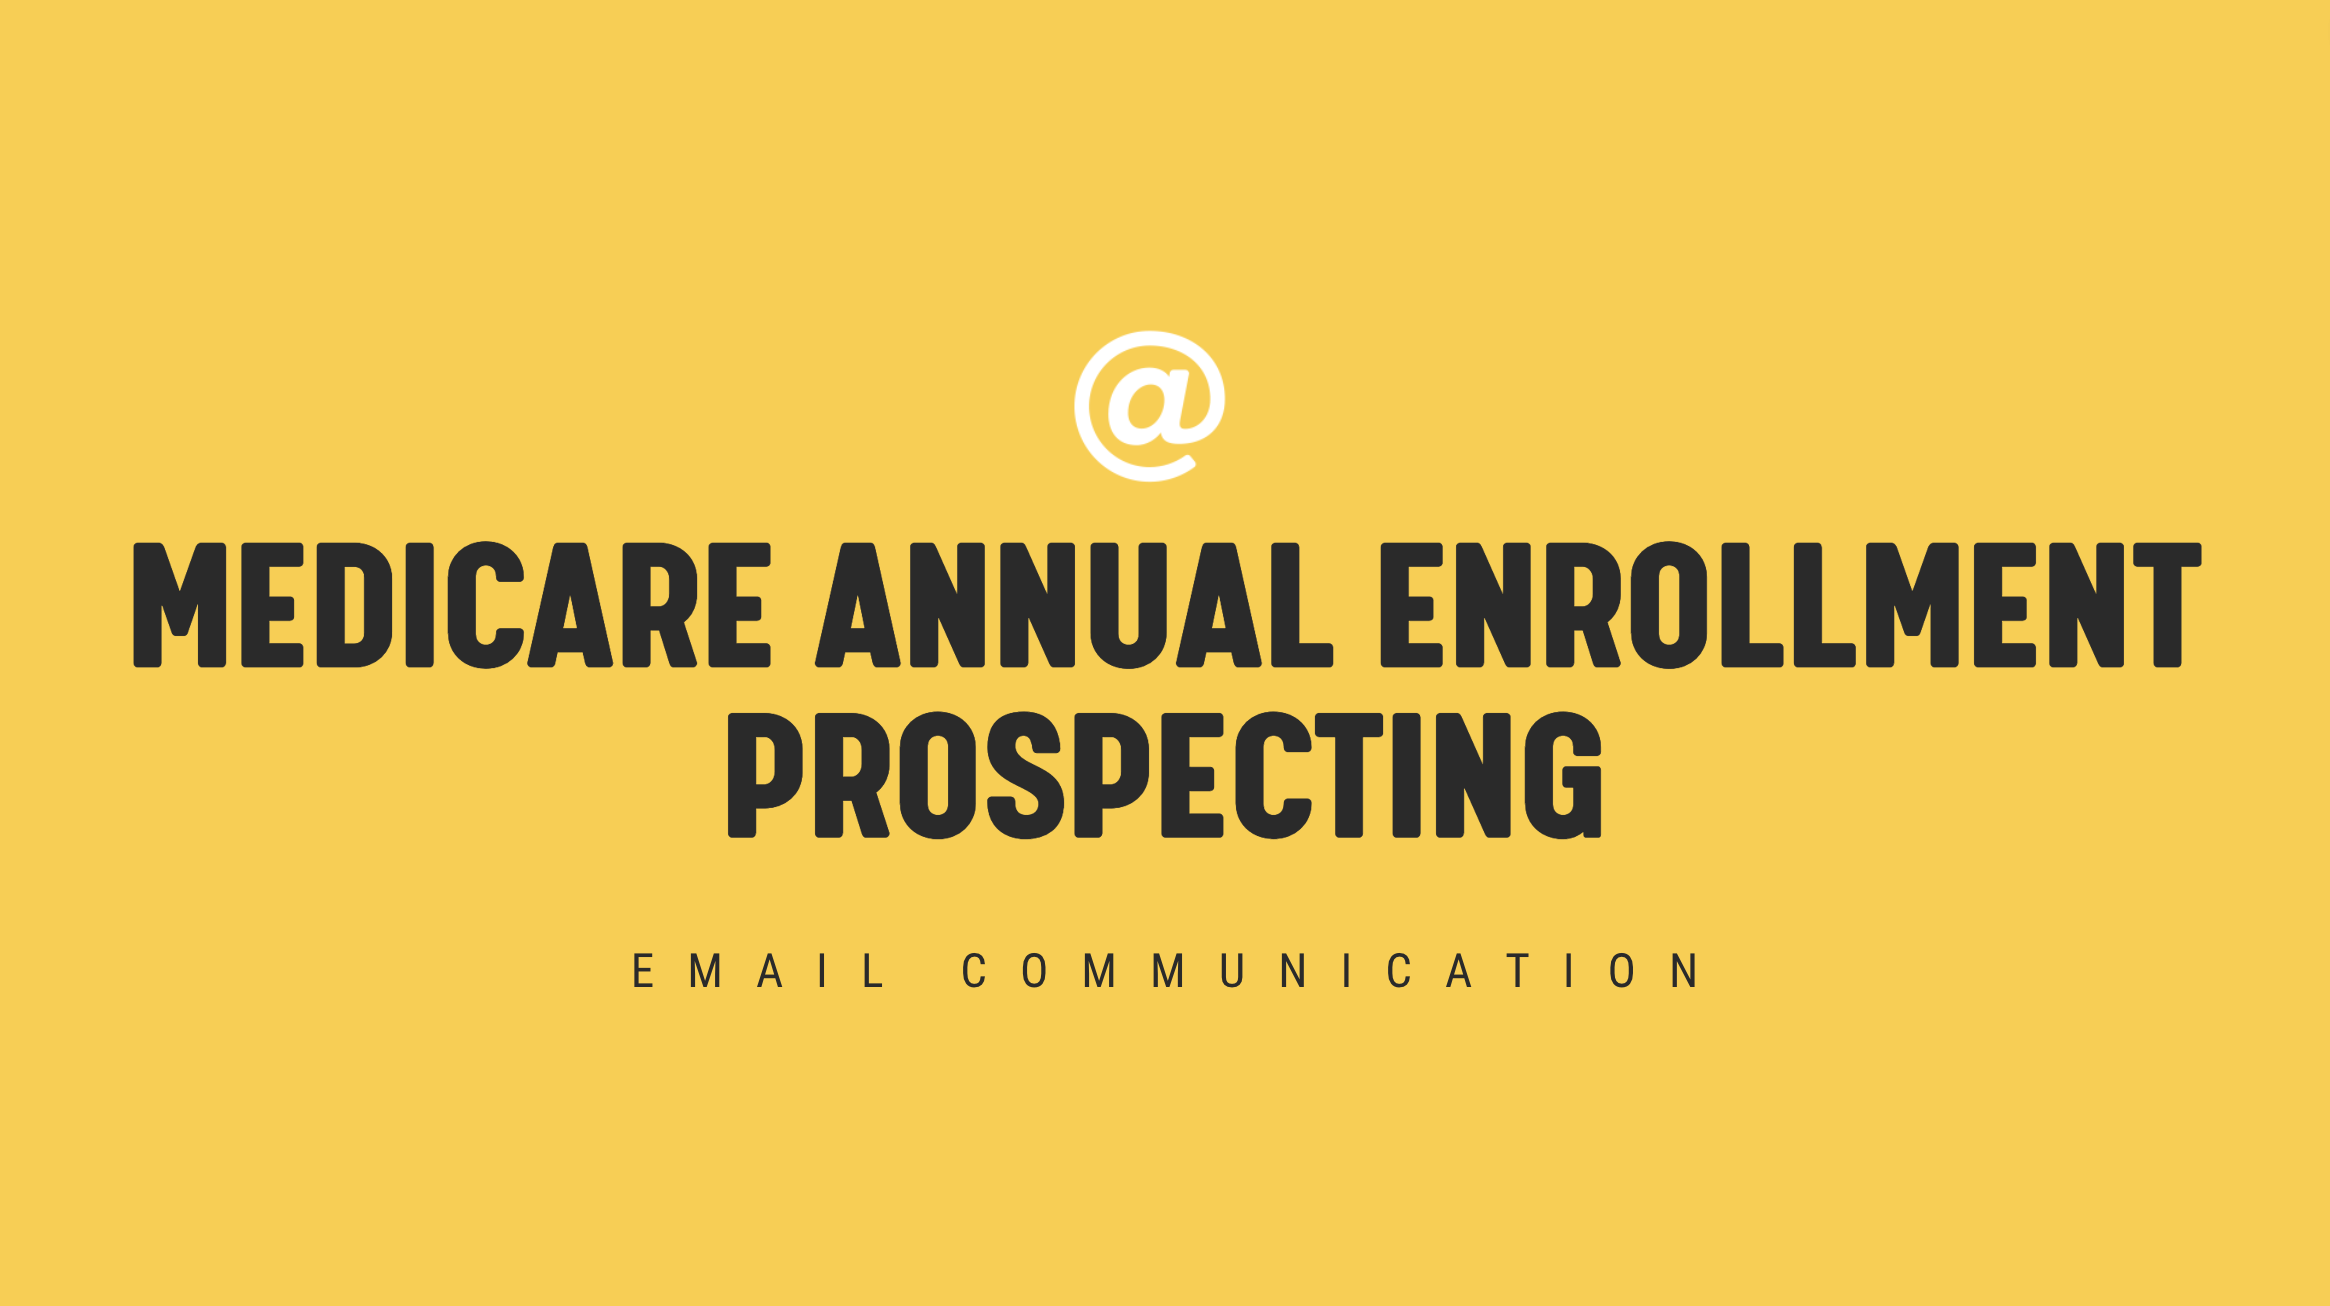 [NEW] Medicare Annual Enrollment Prospecting - Single Email